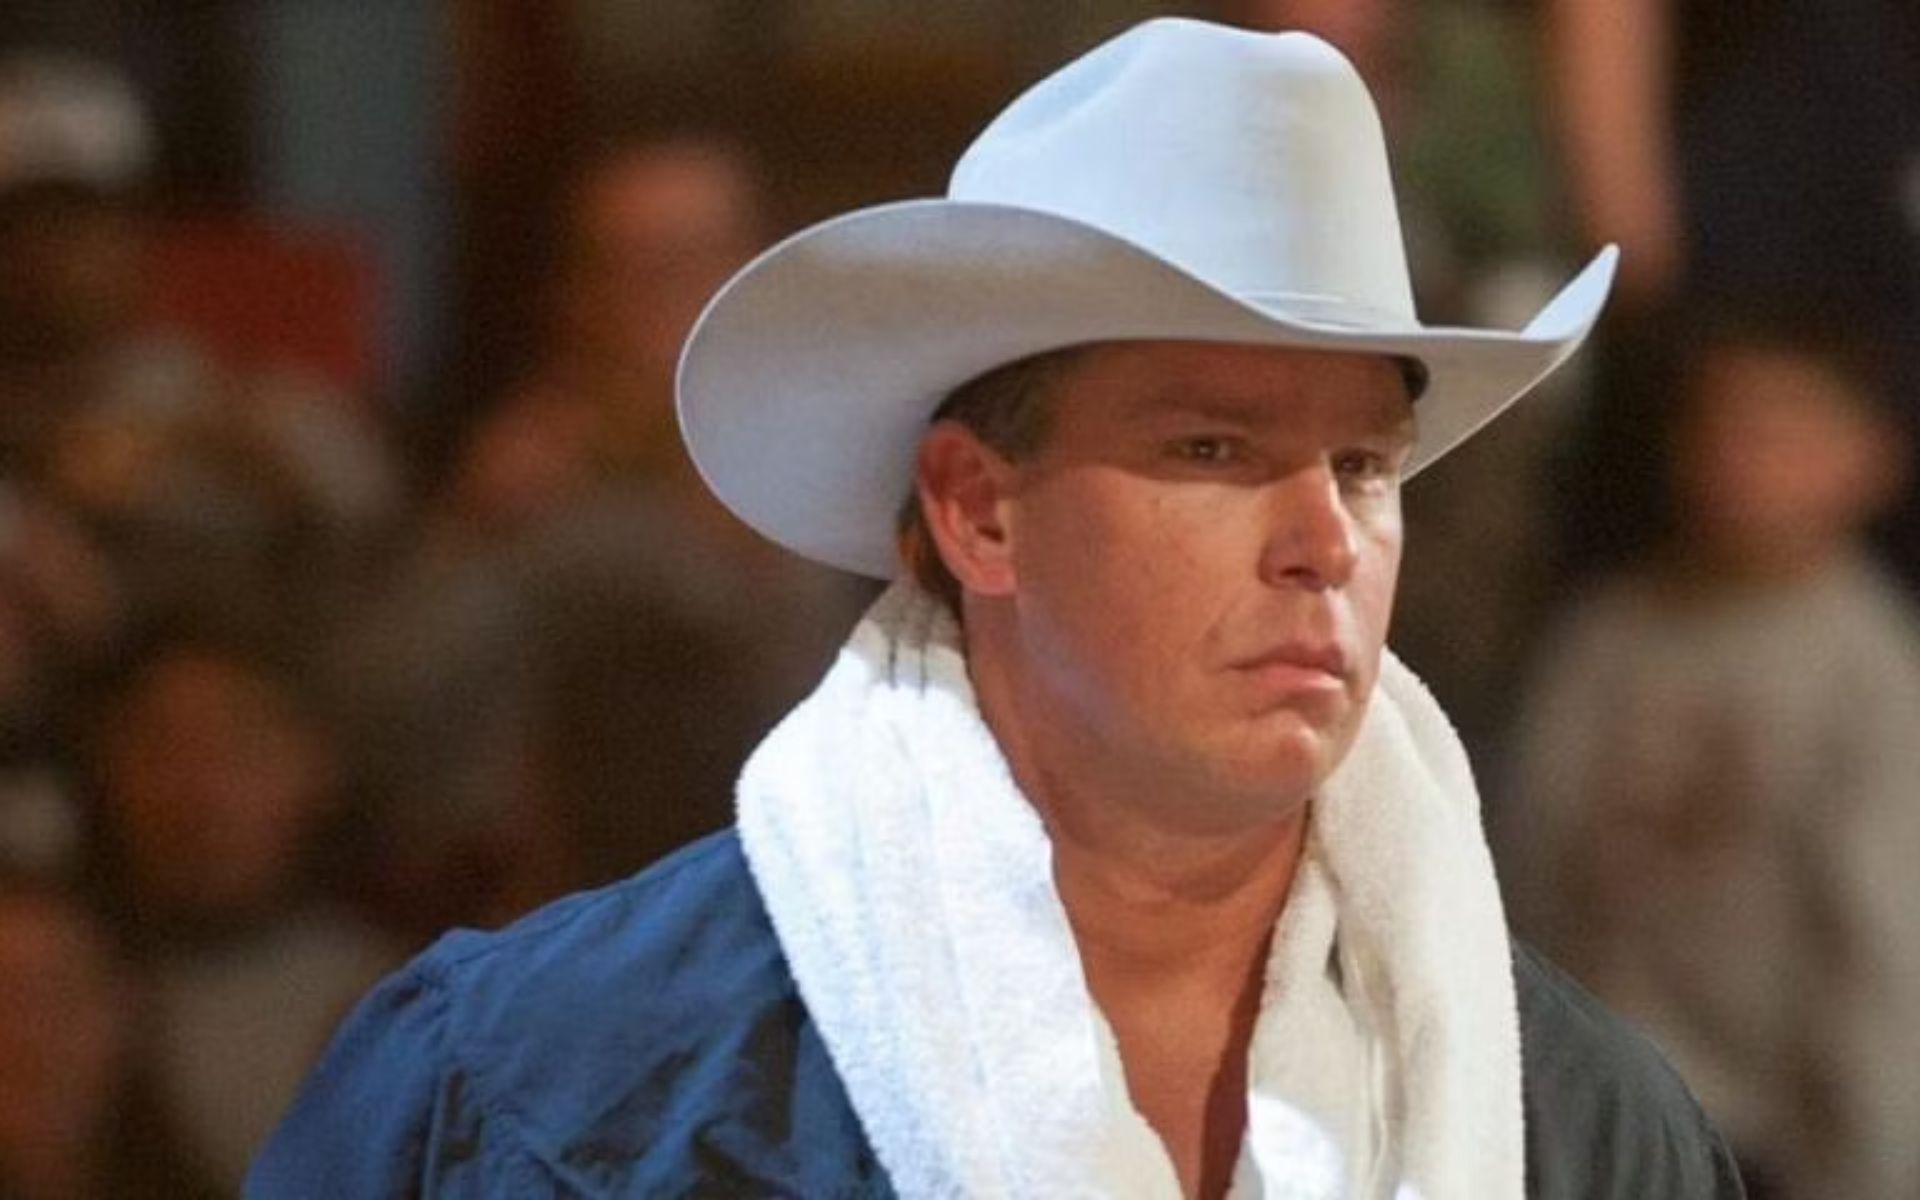 JBL is one of the most successful heels in WWE history